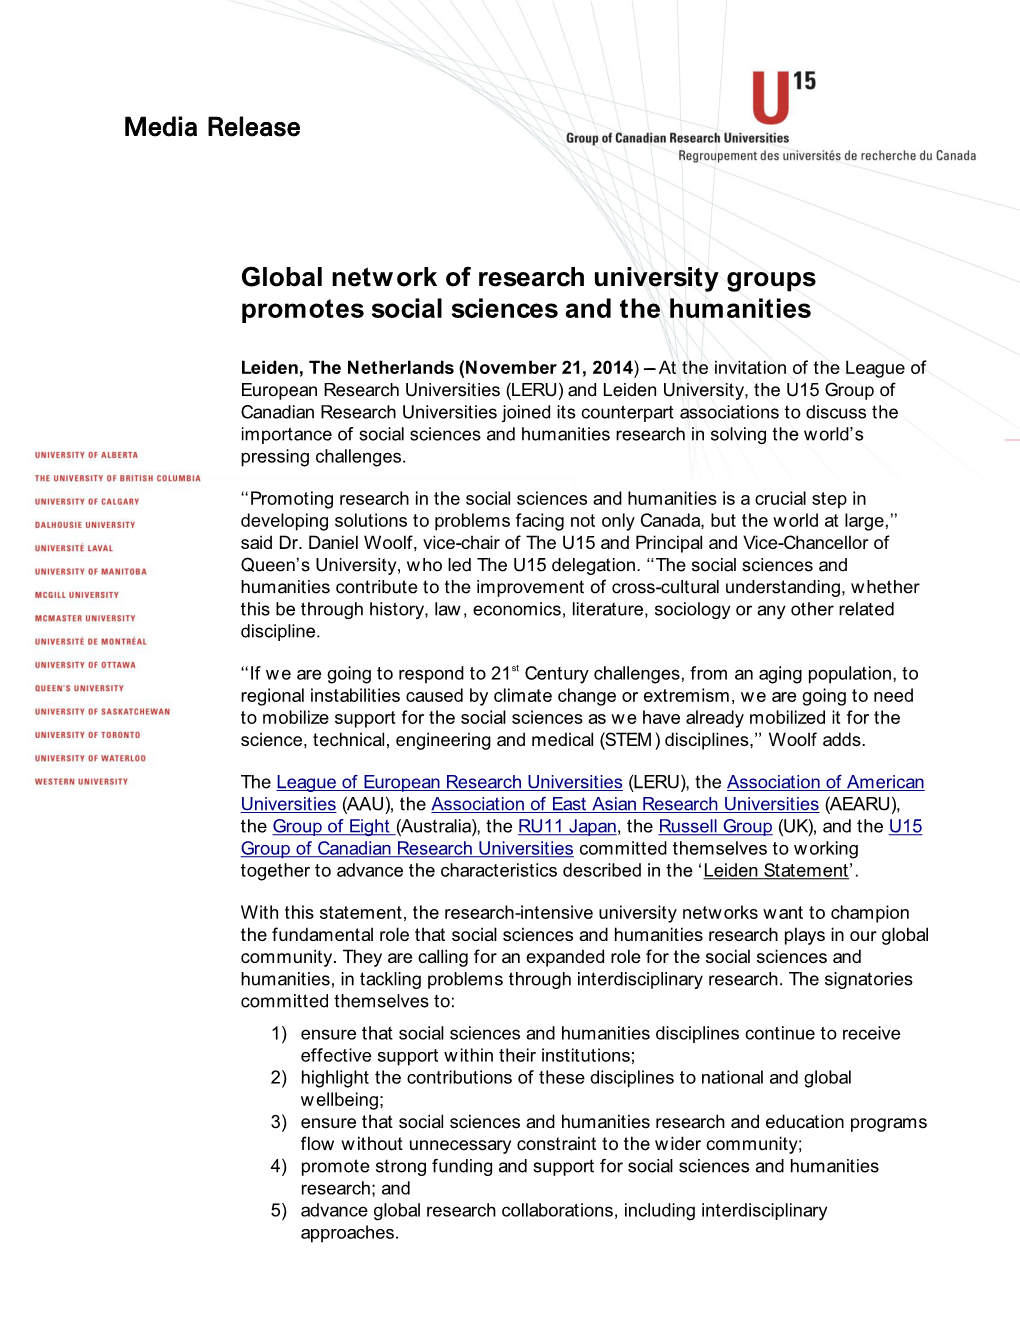 Global Network of Research University Groups Promotes Social Sciences and the Humanities